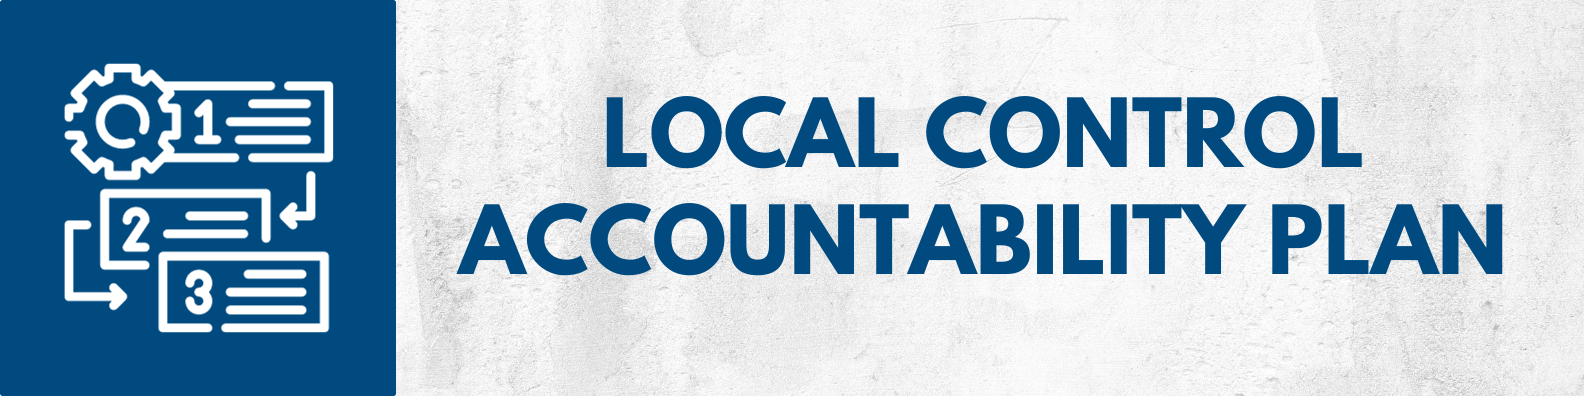 Local Control Accountability Plan button, click to learn more